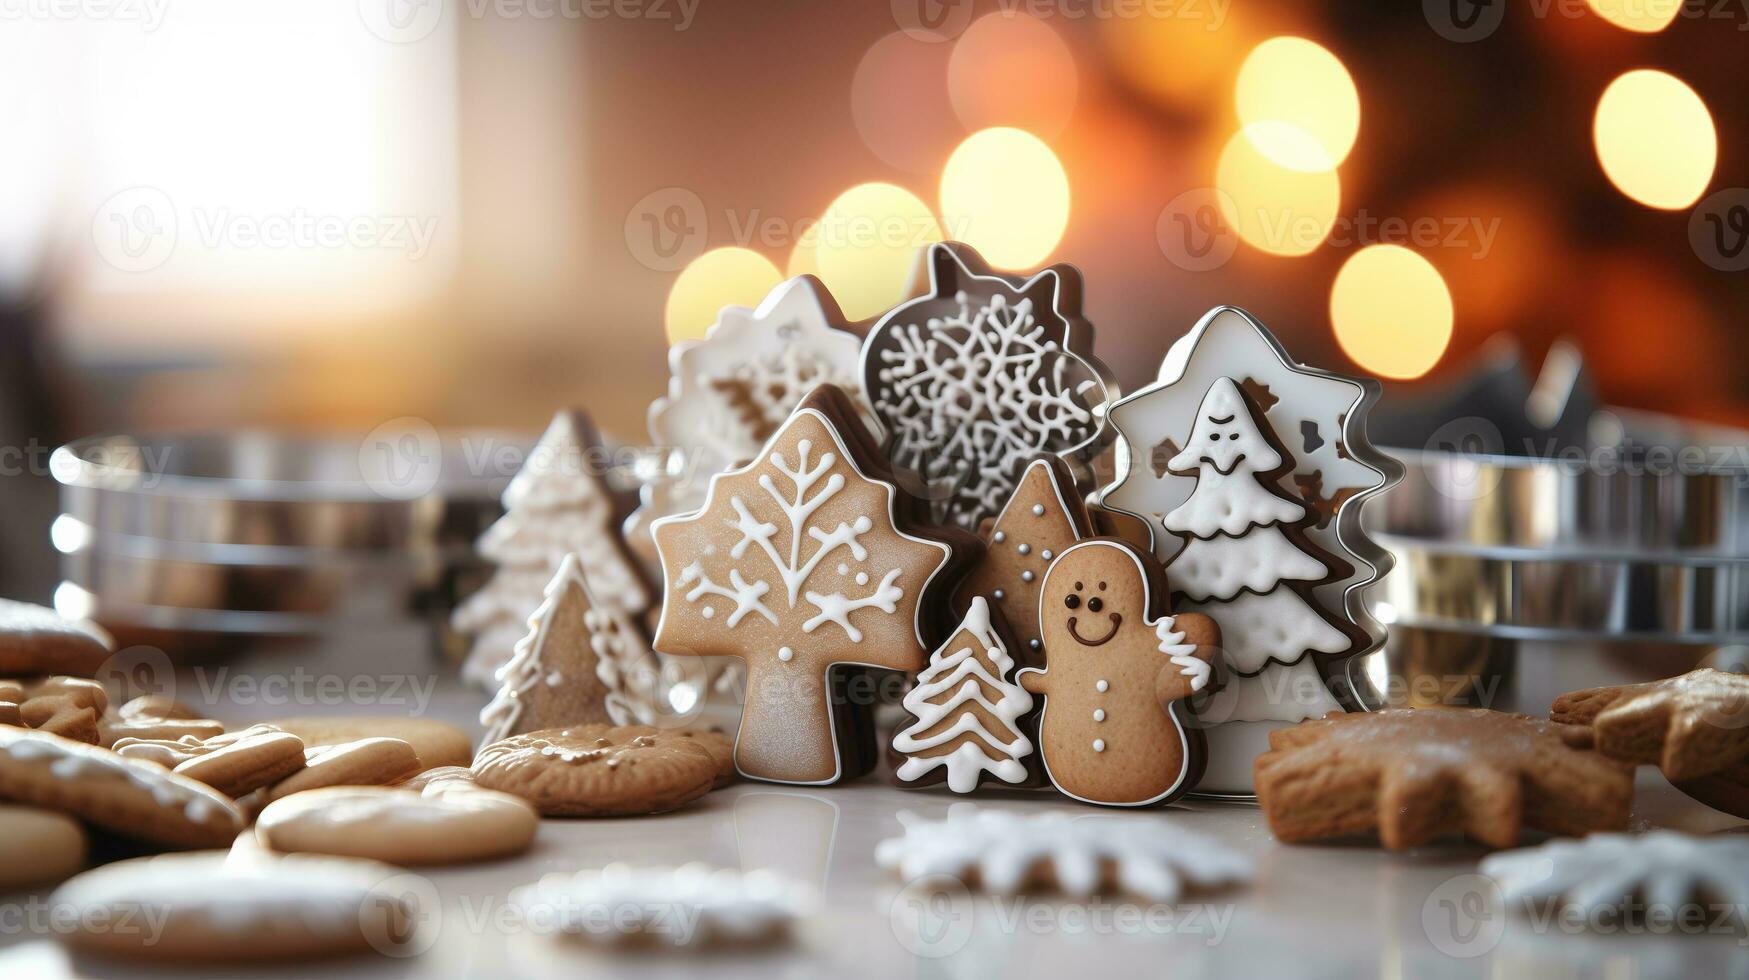 Christmas gingerbread cookies on table bokeh background. Paper for gift boxes prepared for holiday celebrations. photo